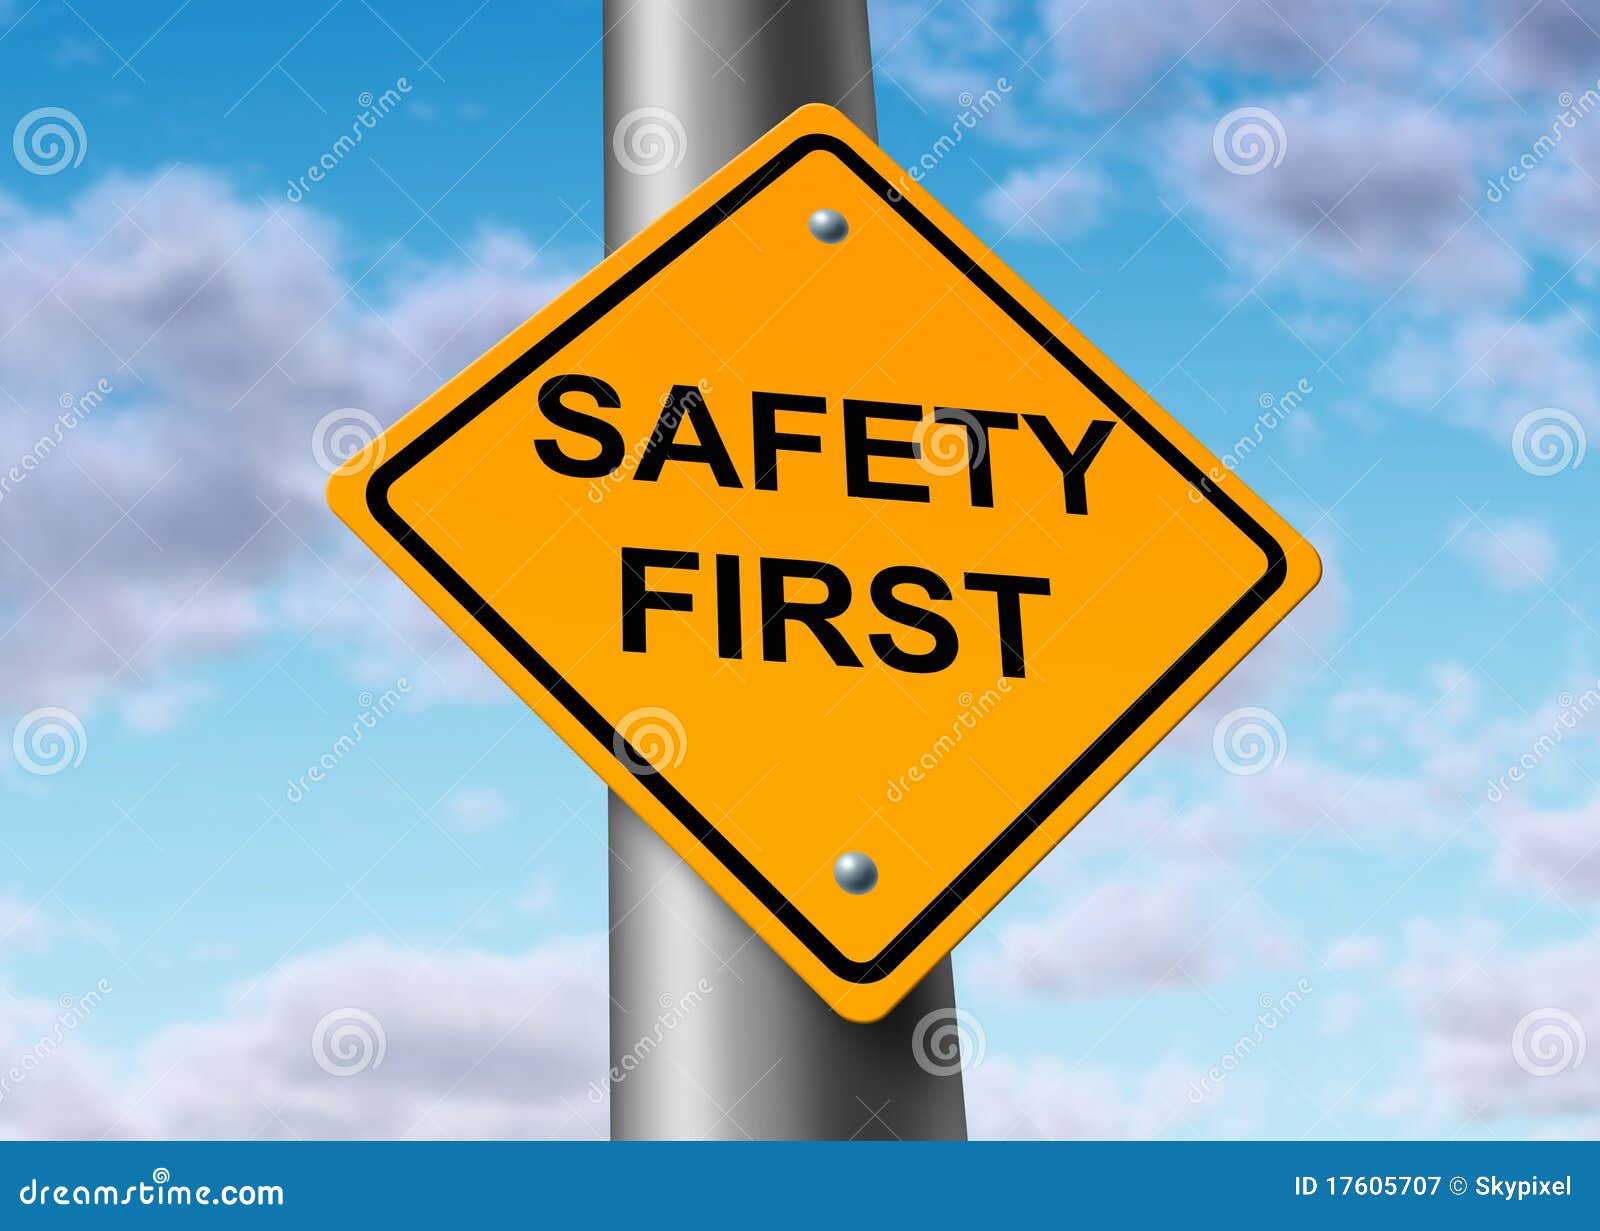 Different Scenes With Road Safety Illustration Royalty Free SVG, Cliparts,  Vectors, and Stock Illustration. Image 56548926.